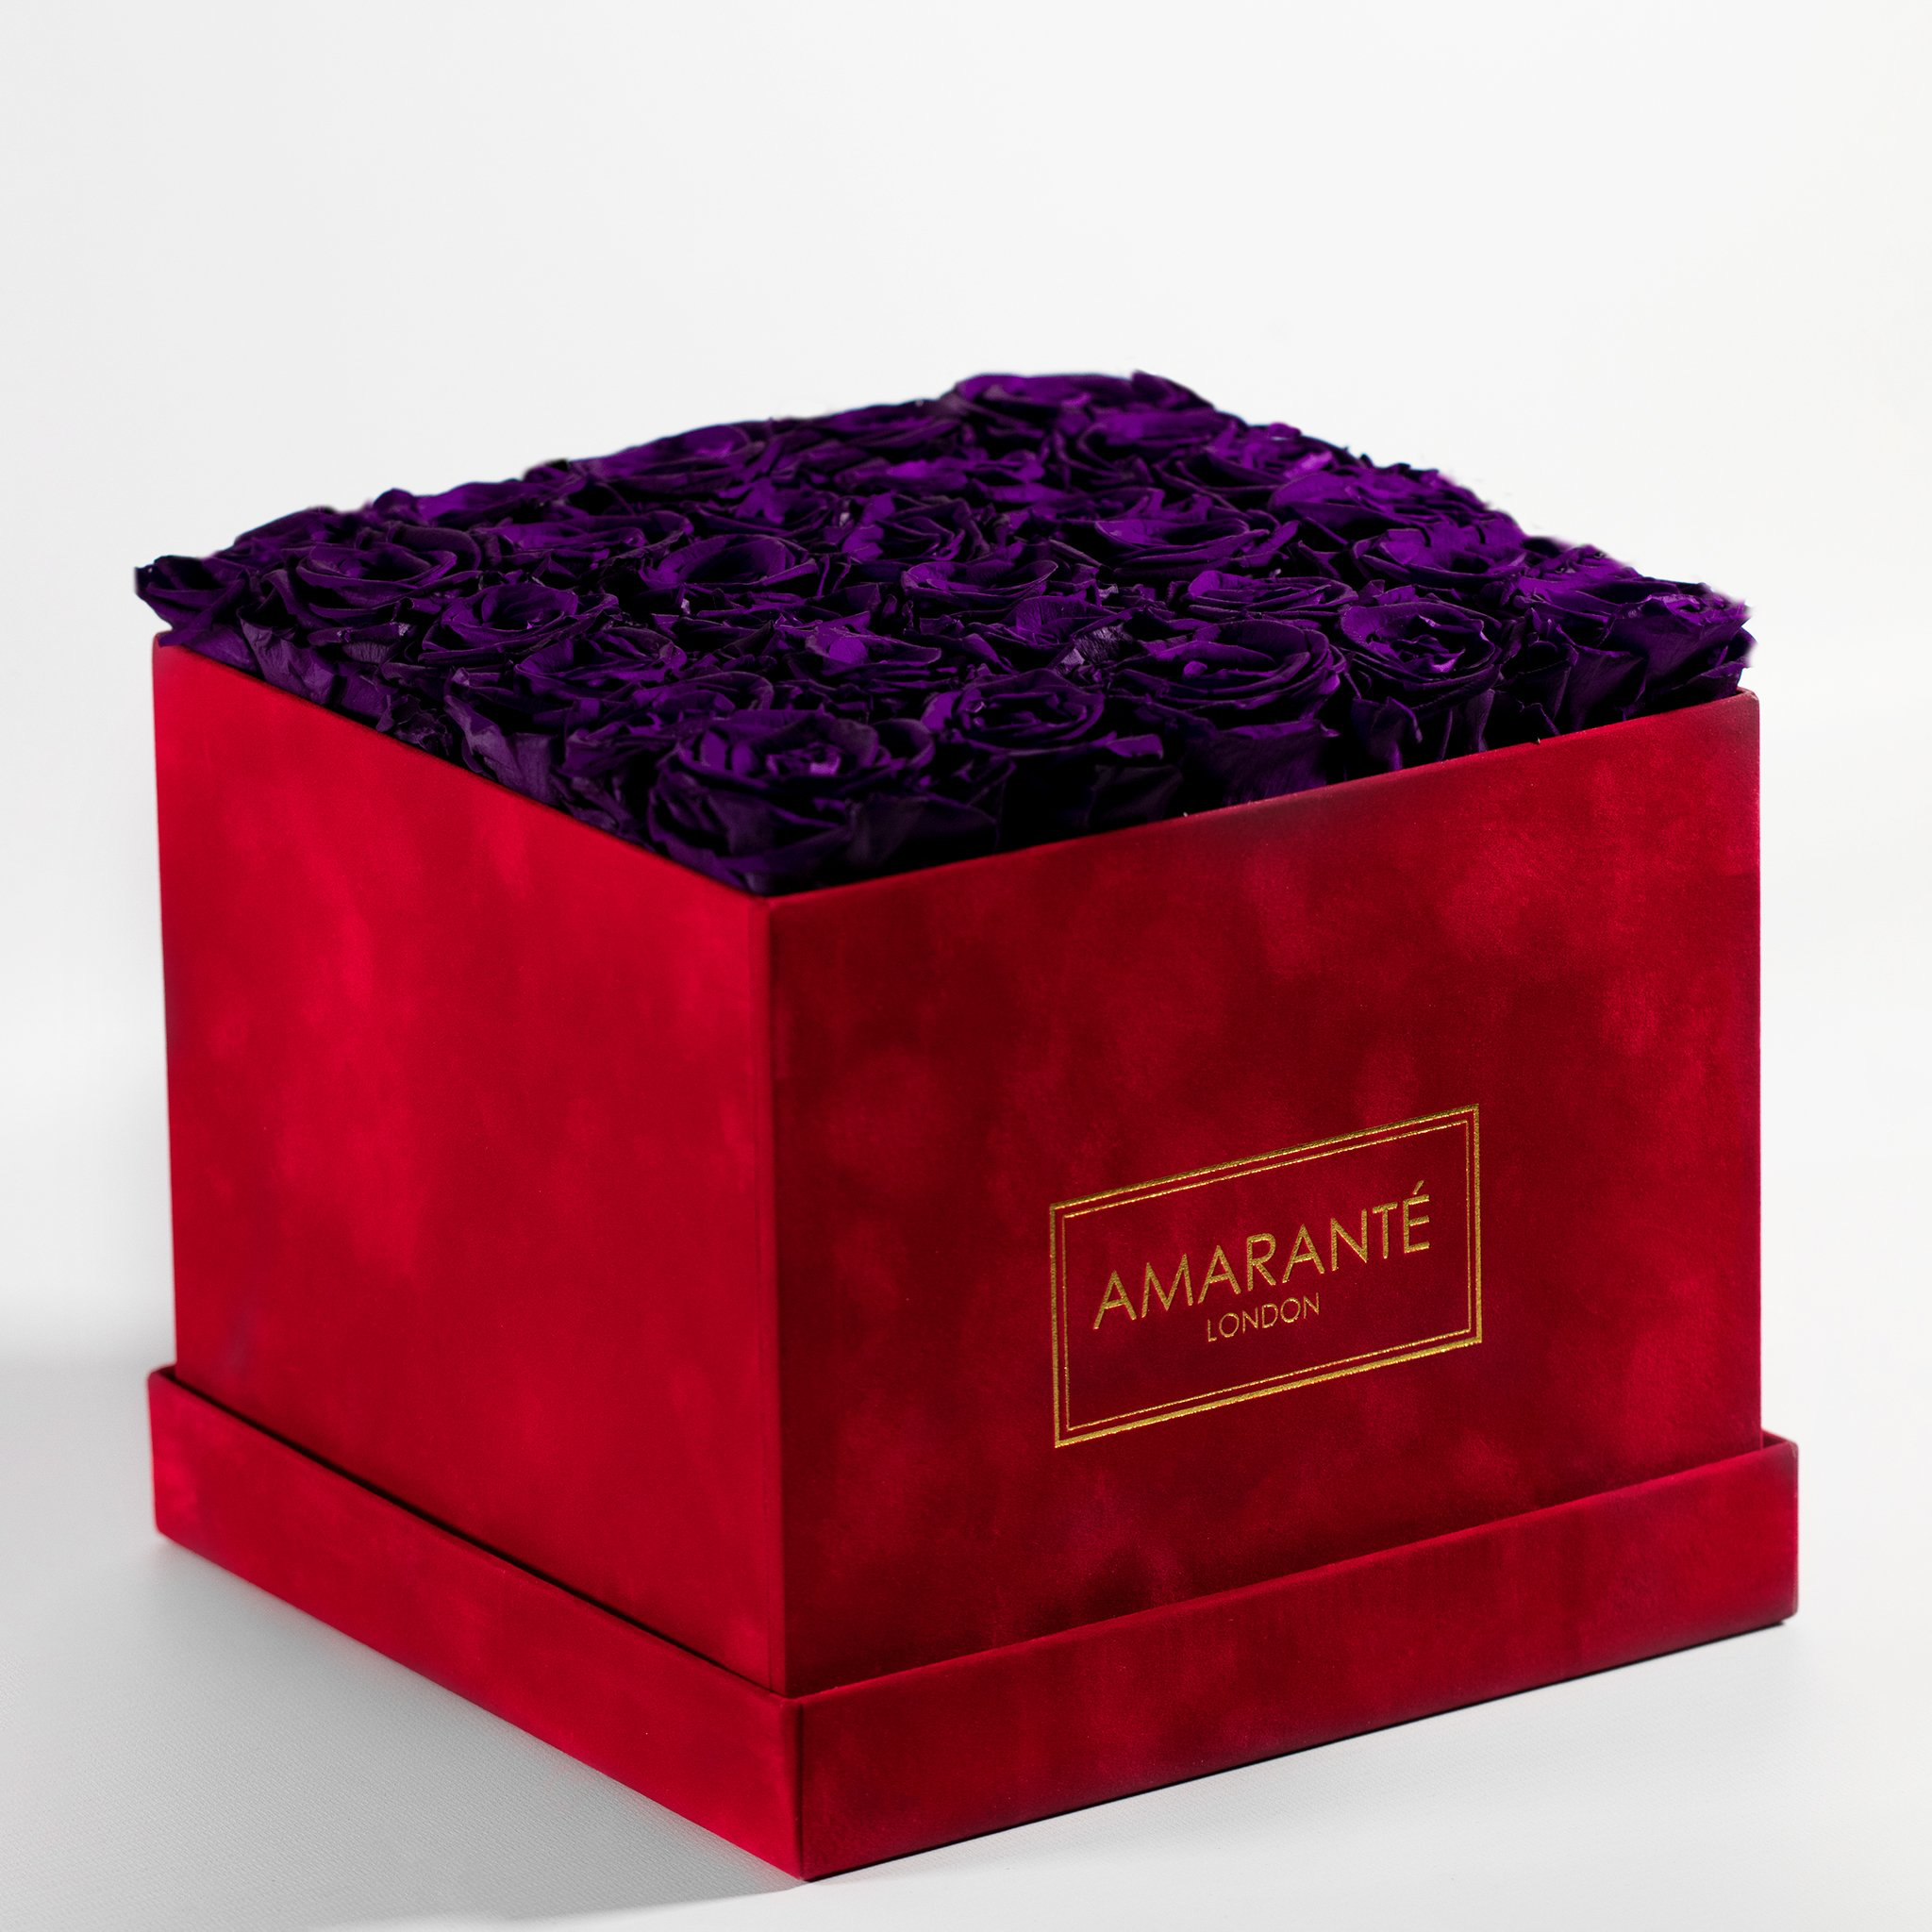 Luxurious dark purple Roses blooming in a chic red large box